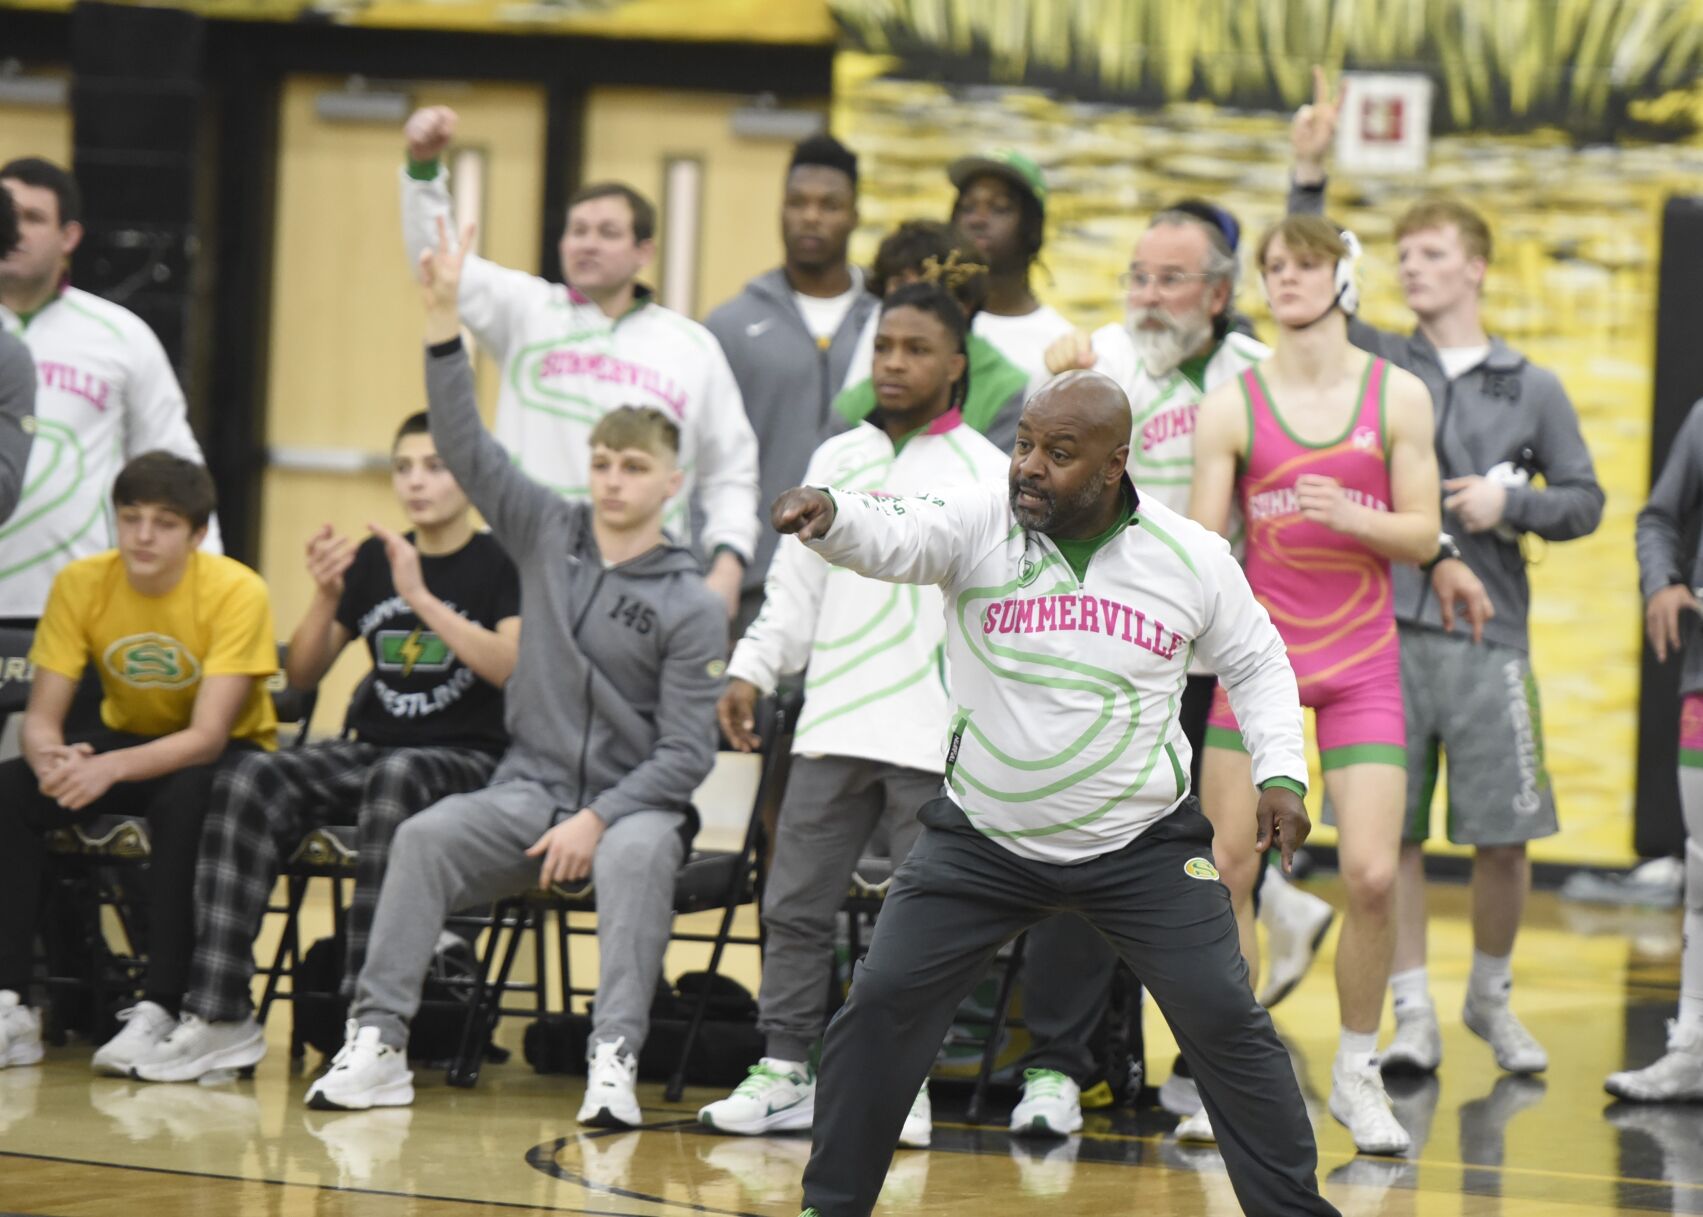 Summerville High School Wrestling Team Wins Fourth Consecutive Lower State Championship, Coach Darryl Tucker Aims for First State Title